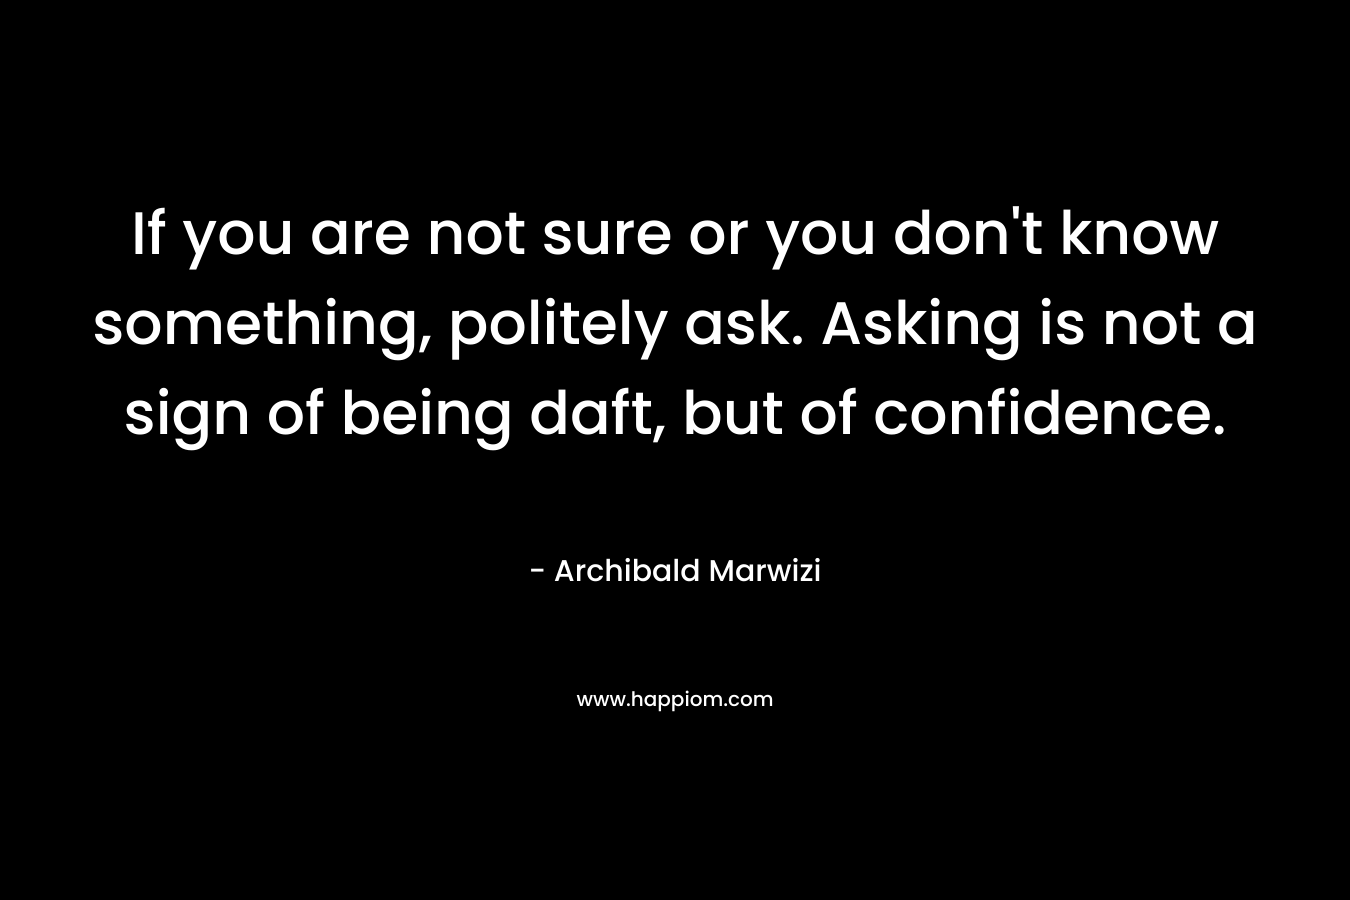 If you are not sure or you don't know something, politely ask. Asking is not a sign of being daft, but of confidence.